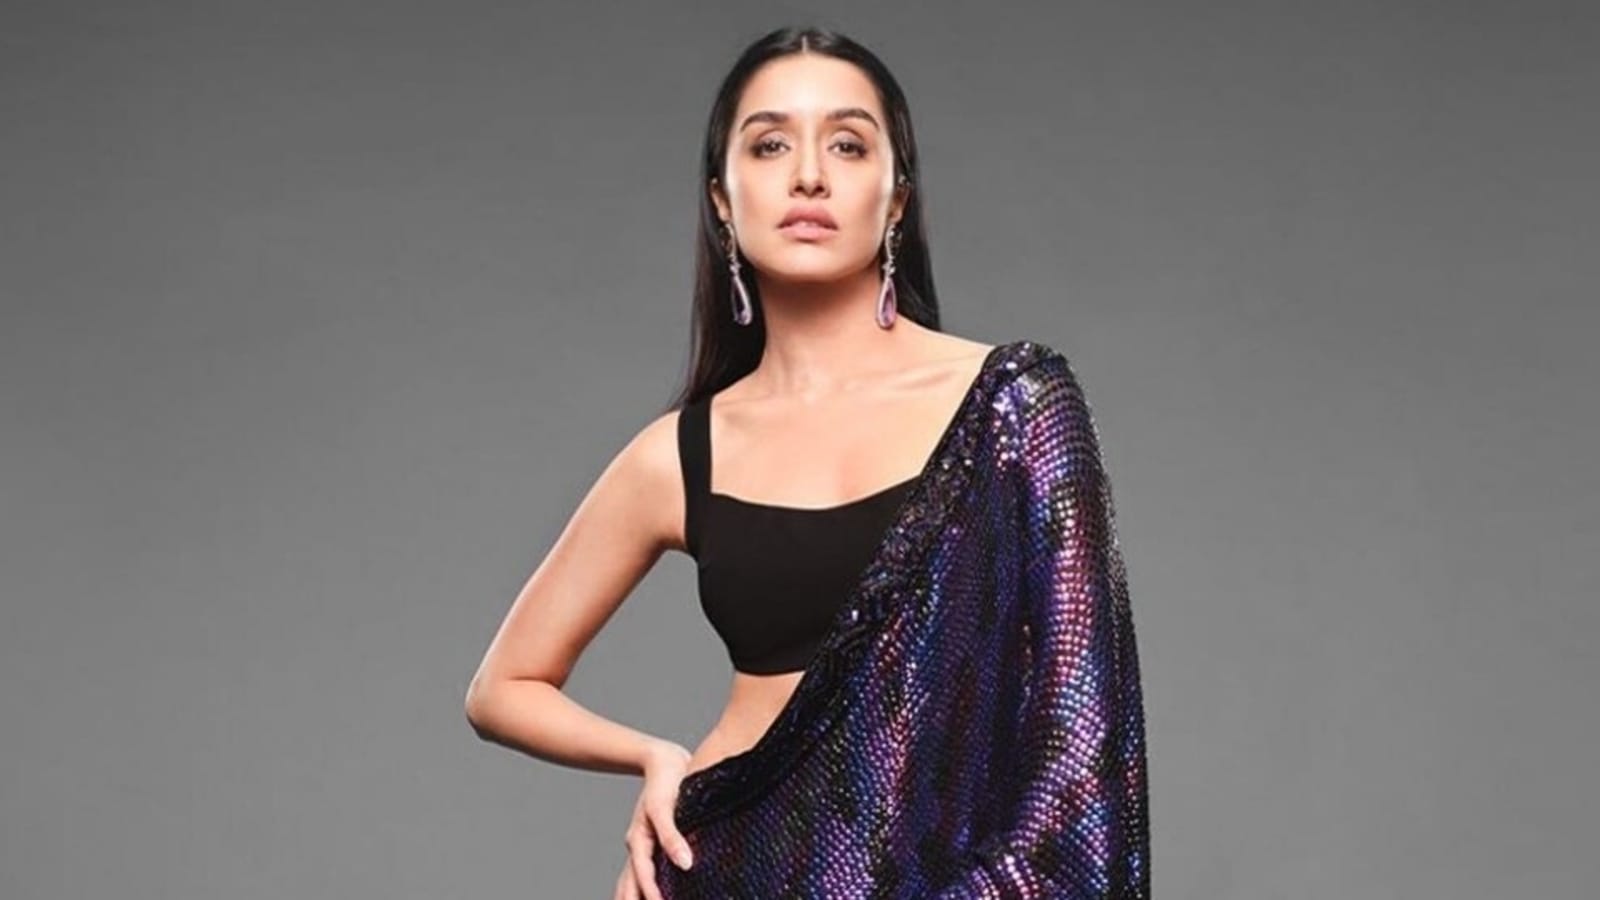 Xxx Sardha Kapur Videos - Shraddha Kapoor's sensual sequin saree and sleeveless blouse will electrify  your weekend party closet: See new pic | Fashion Trends - Hindustan Times